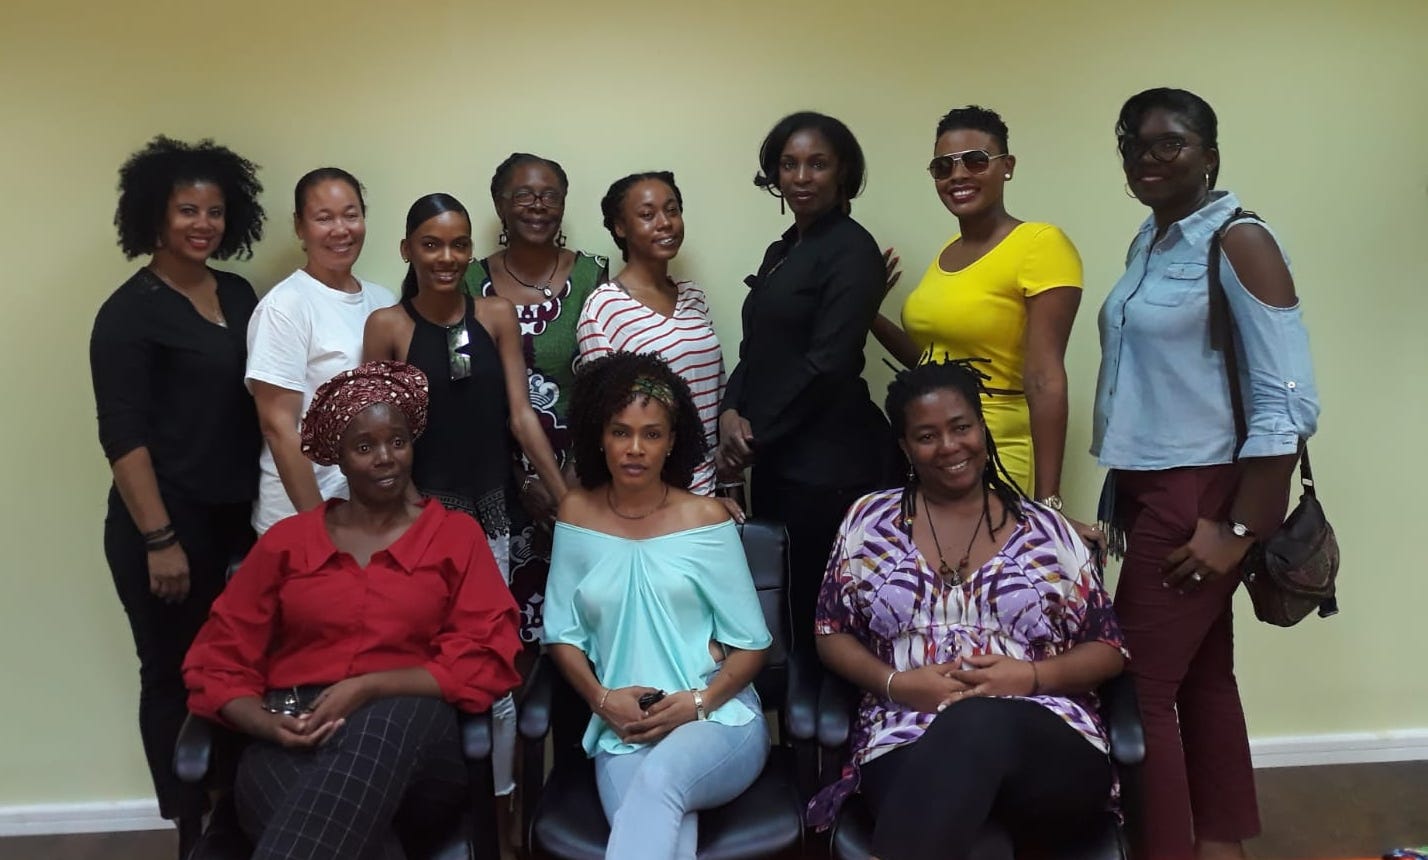  OECS Competitive Business Unit (CBU) Programme  helped to facilitate the formation of National Fashion Associations in  Dominica and St. Vincent and the Grenadines